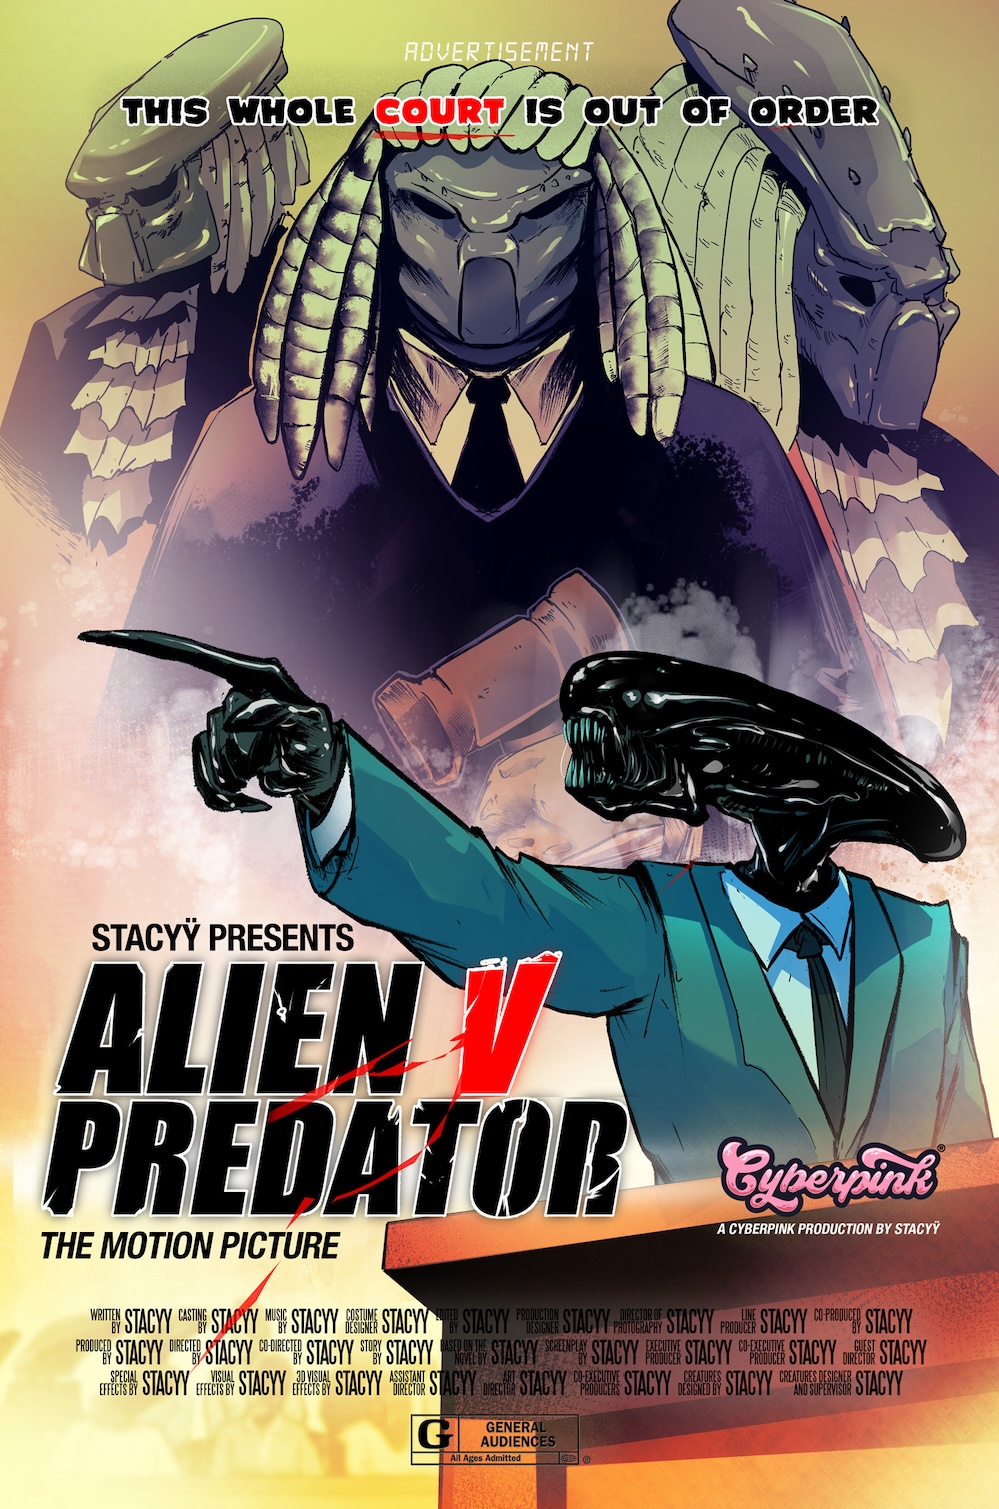 Cyberpink's Alien V Predator the Legal Drama and Motion Picture by Stacyÿ